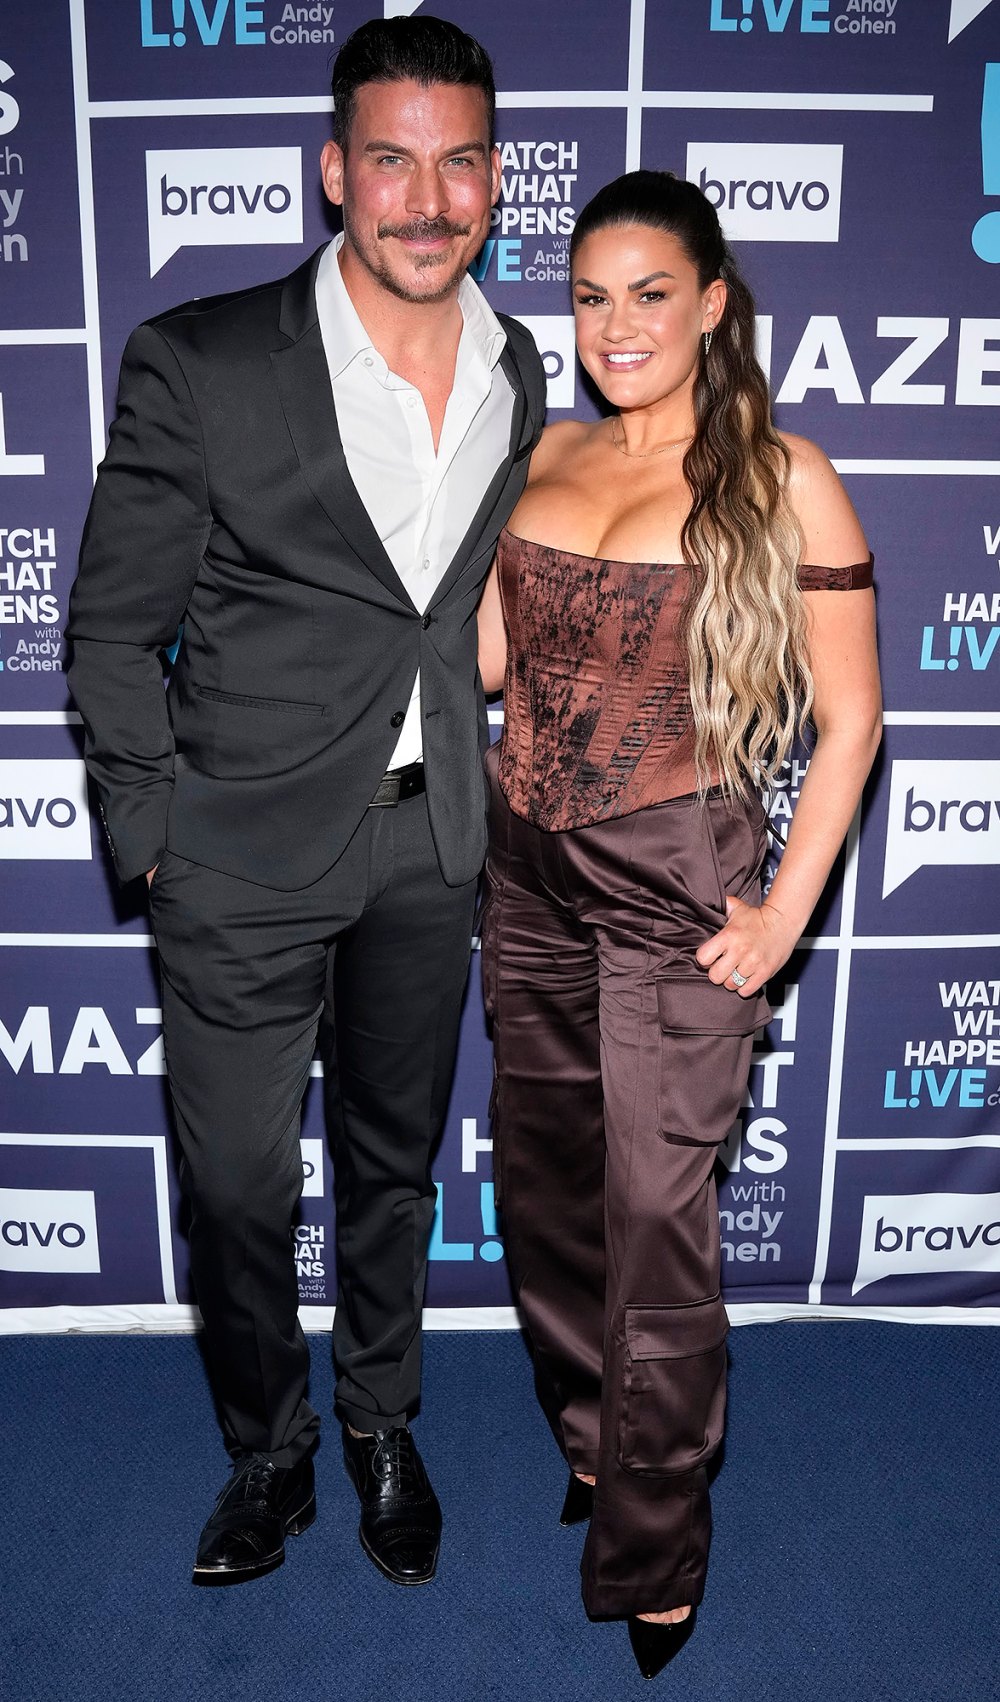 Brittany Cartwright Reveals When She and Jax Taylor Will Start Trying for Baby No. 2, What She Misses Most About Pregnancy